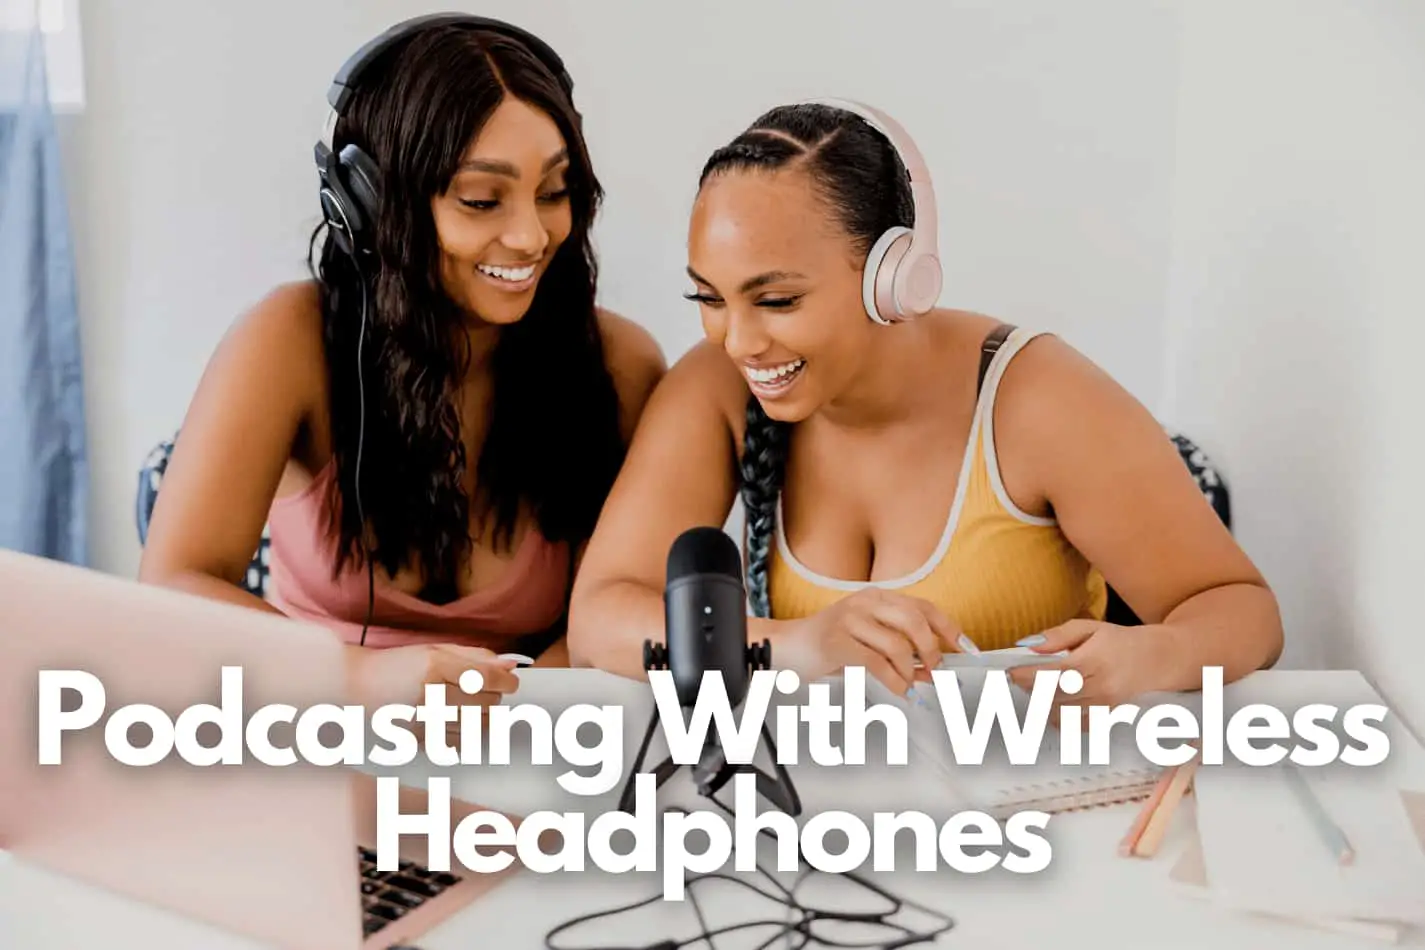 Can You Podcast Using Wireless Headphones & Should You?